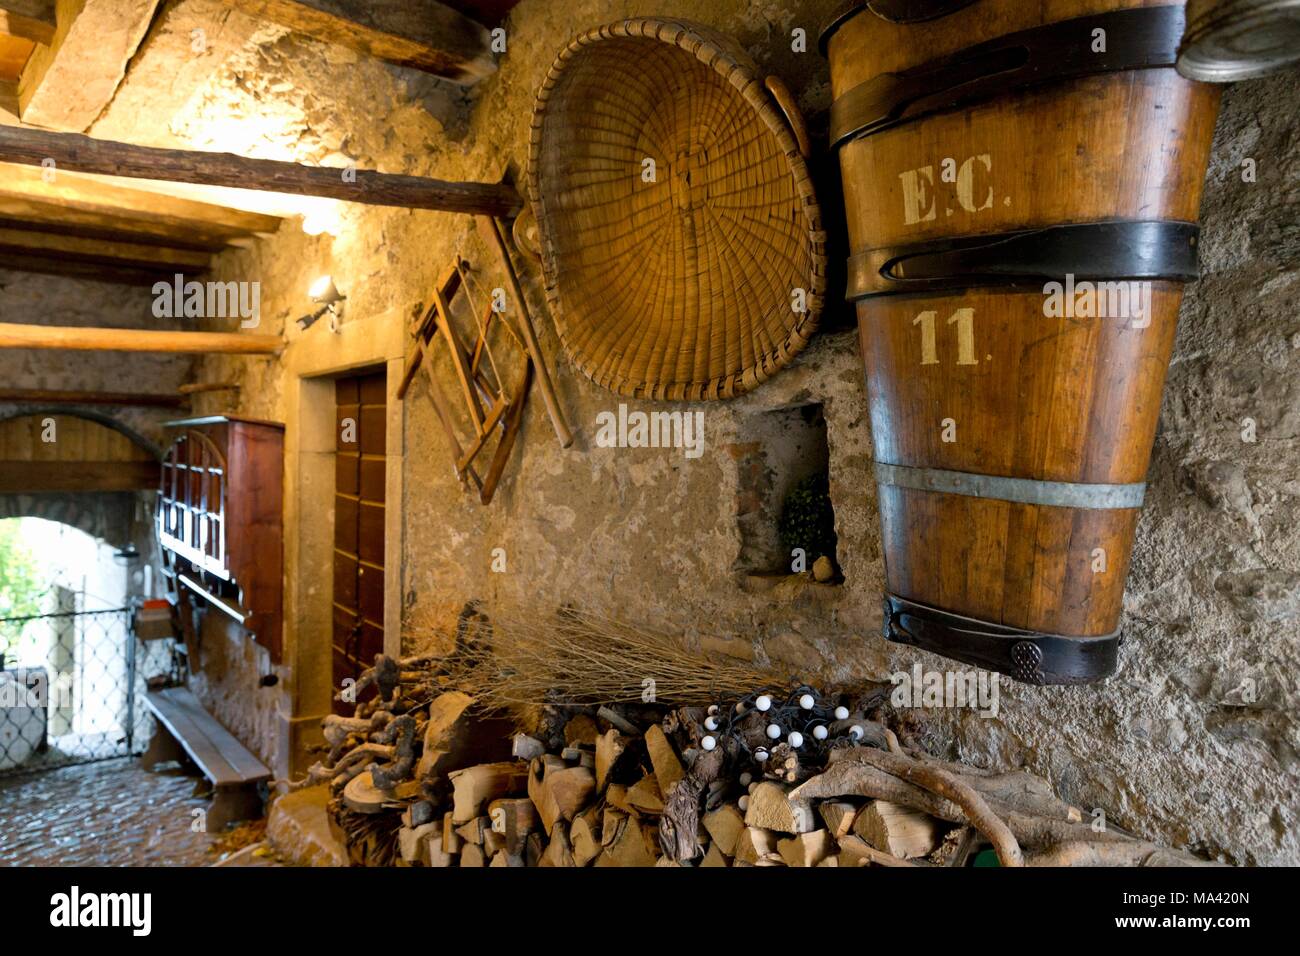 Wine-growing Saint-Saphorin, old tools for harvesting grapes being used as decorations, Switzerland Stock Photo